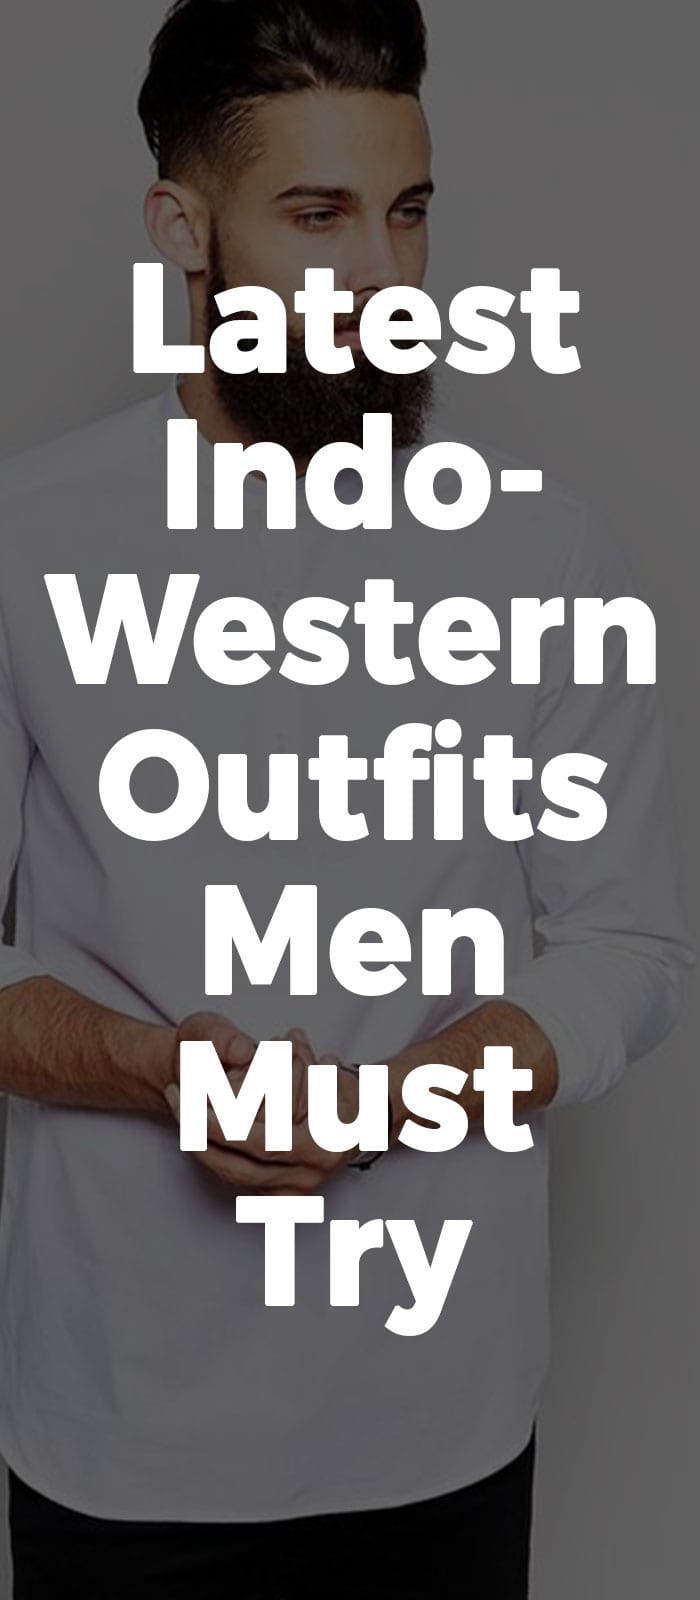 Latest Indo- Western Outfits Men Must Try